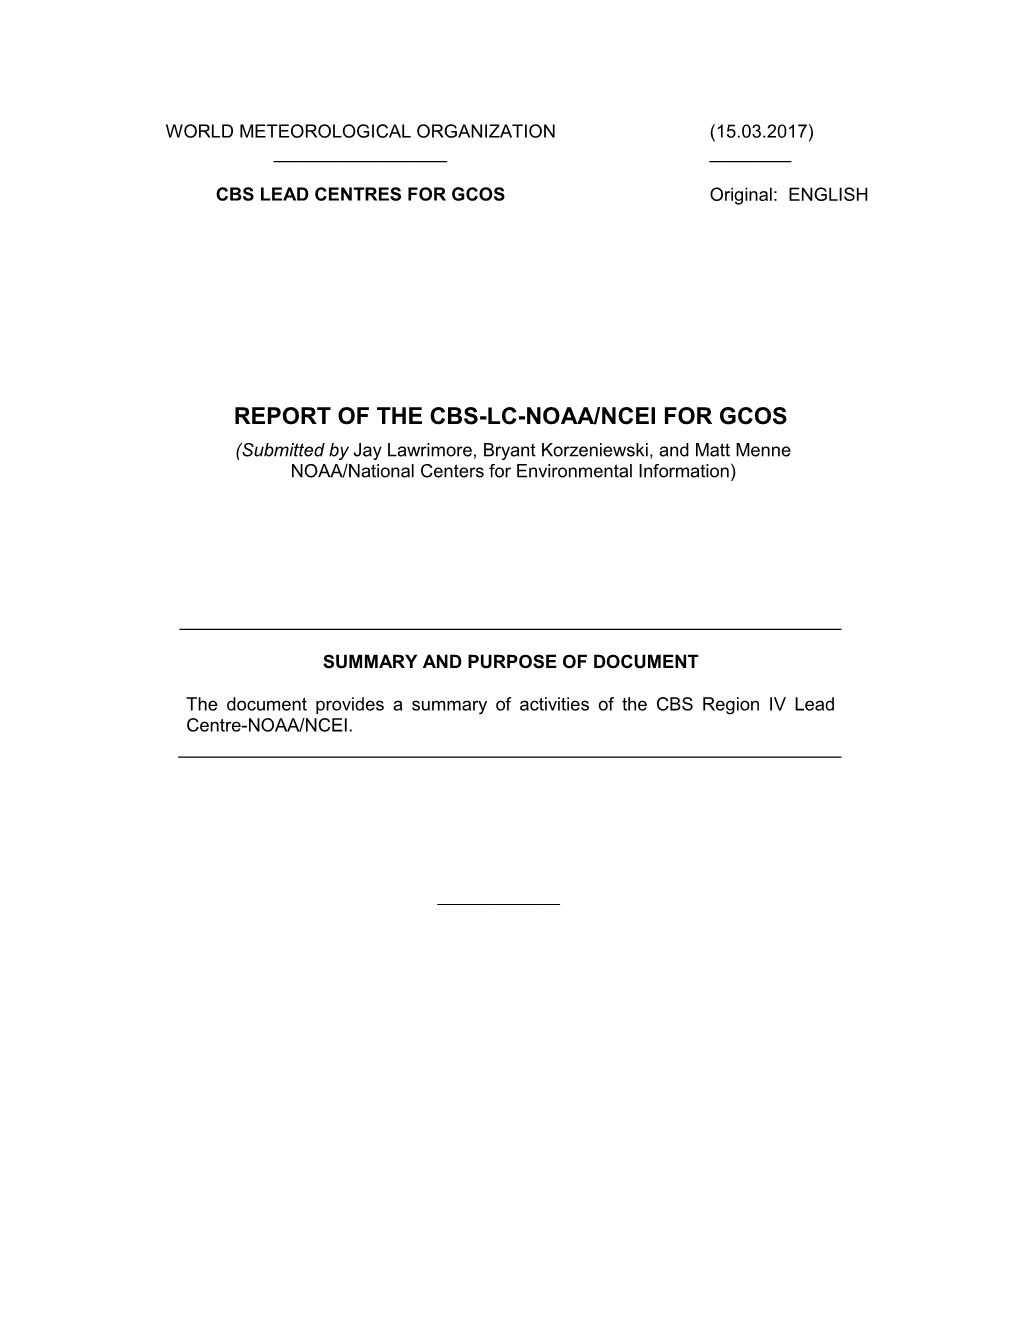 REPORT of the CBS-LC-NOAA/NCEI for GCOS (Submitted by Jay Lawrimore, Bryant Korzeniewski, and Matt Menne NOAA/National Centers for Environmental Information)